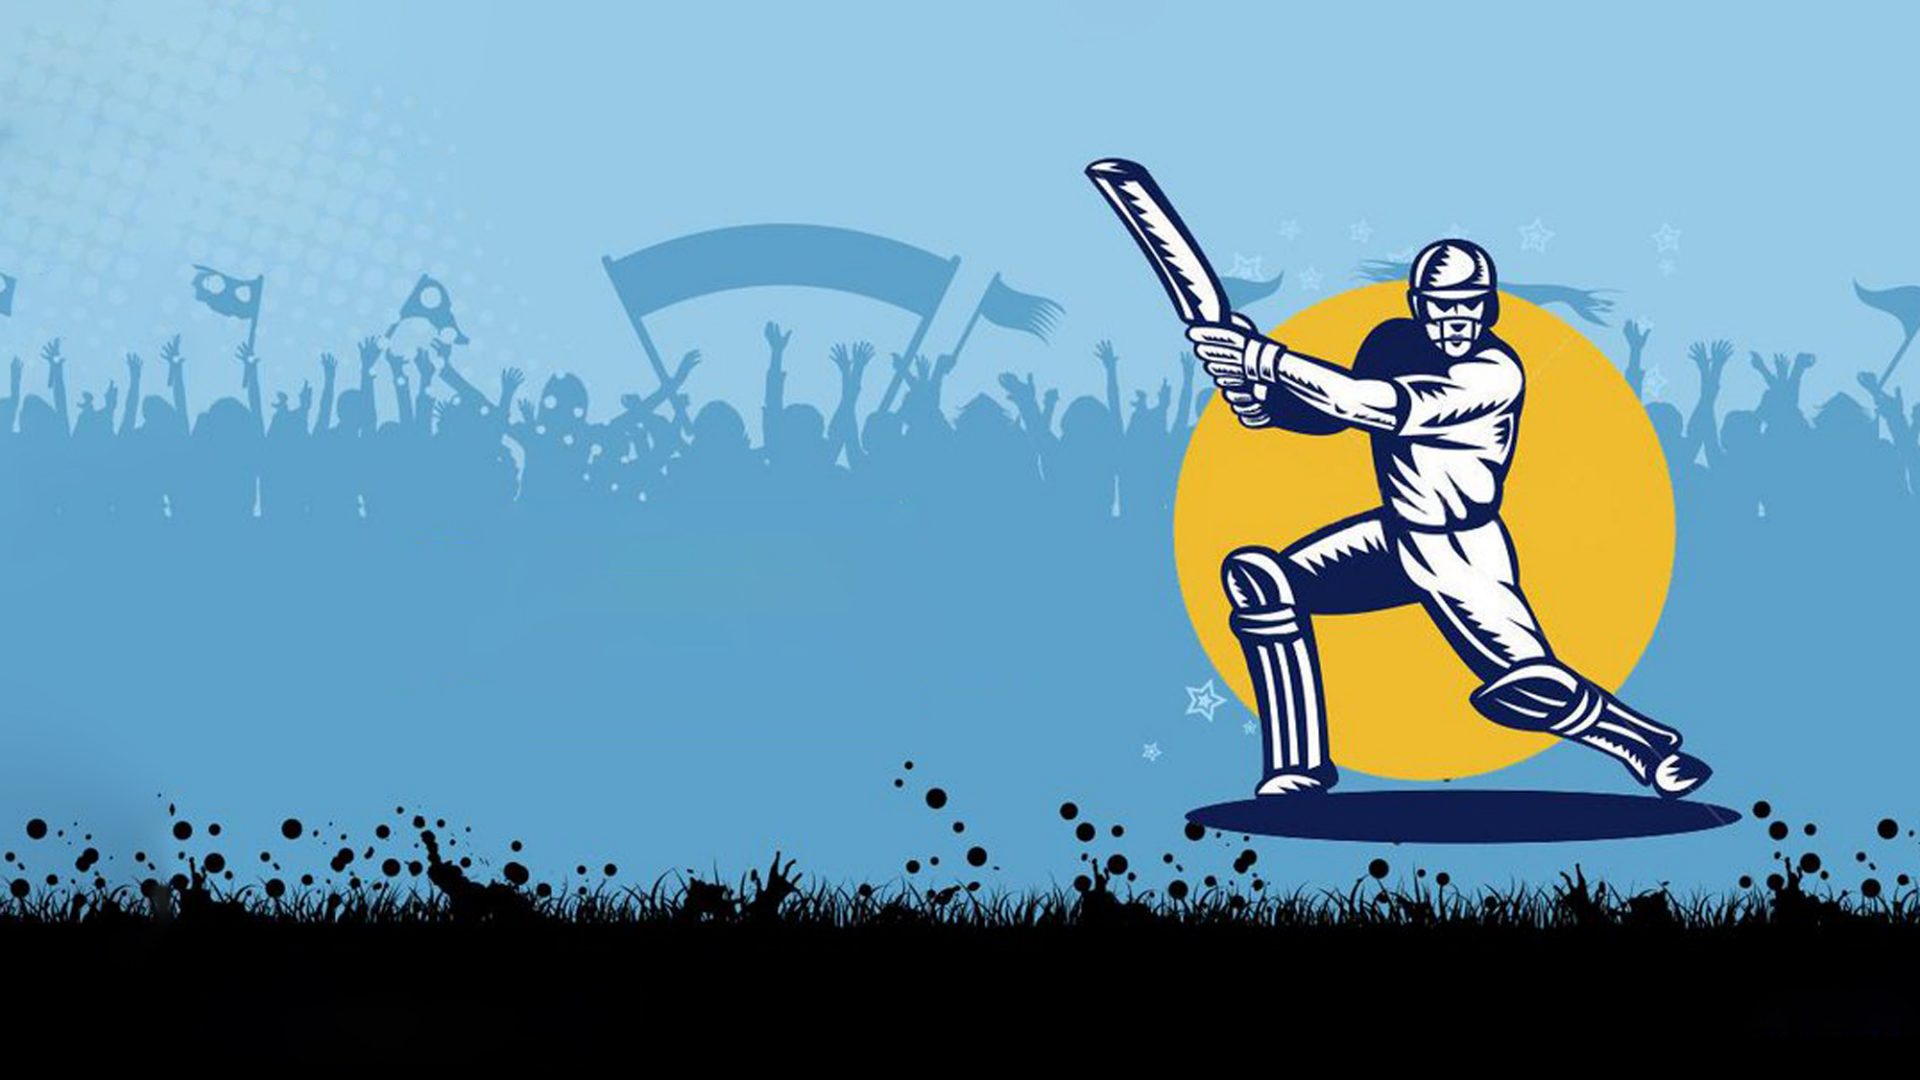 A top Indian auto brand engages its cricket-mad audience with a creative  spin